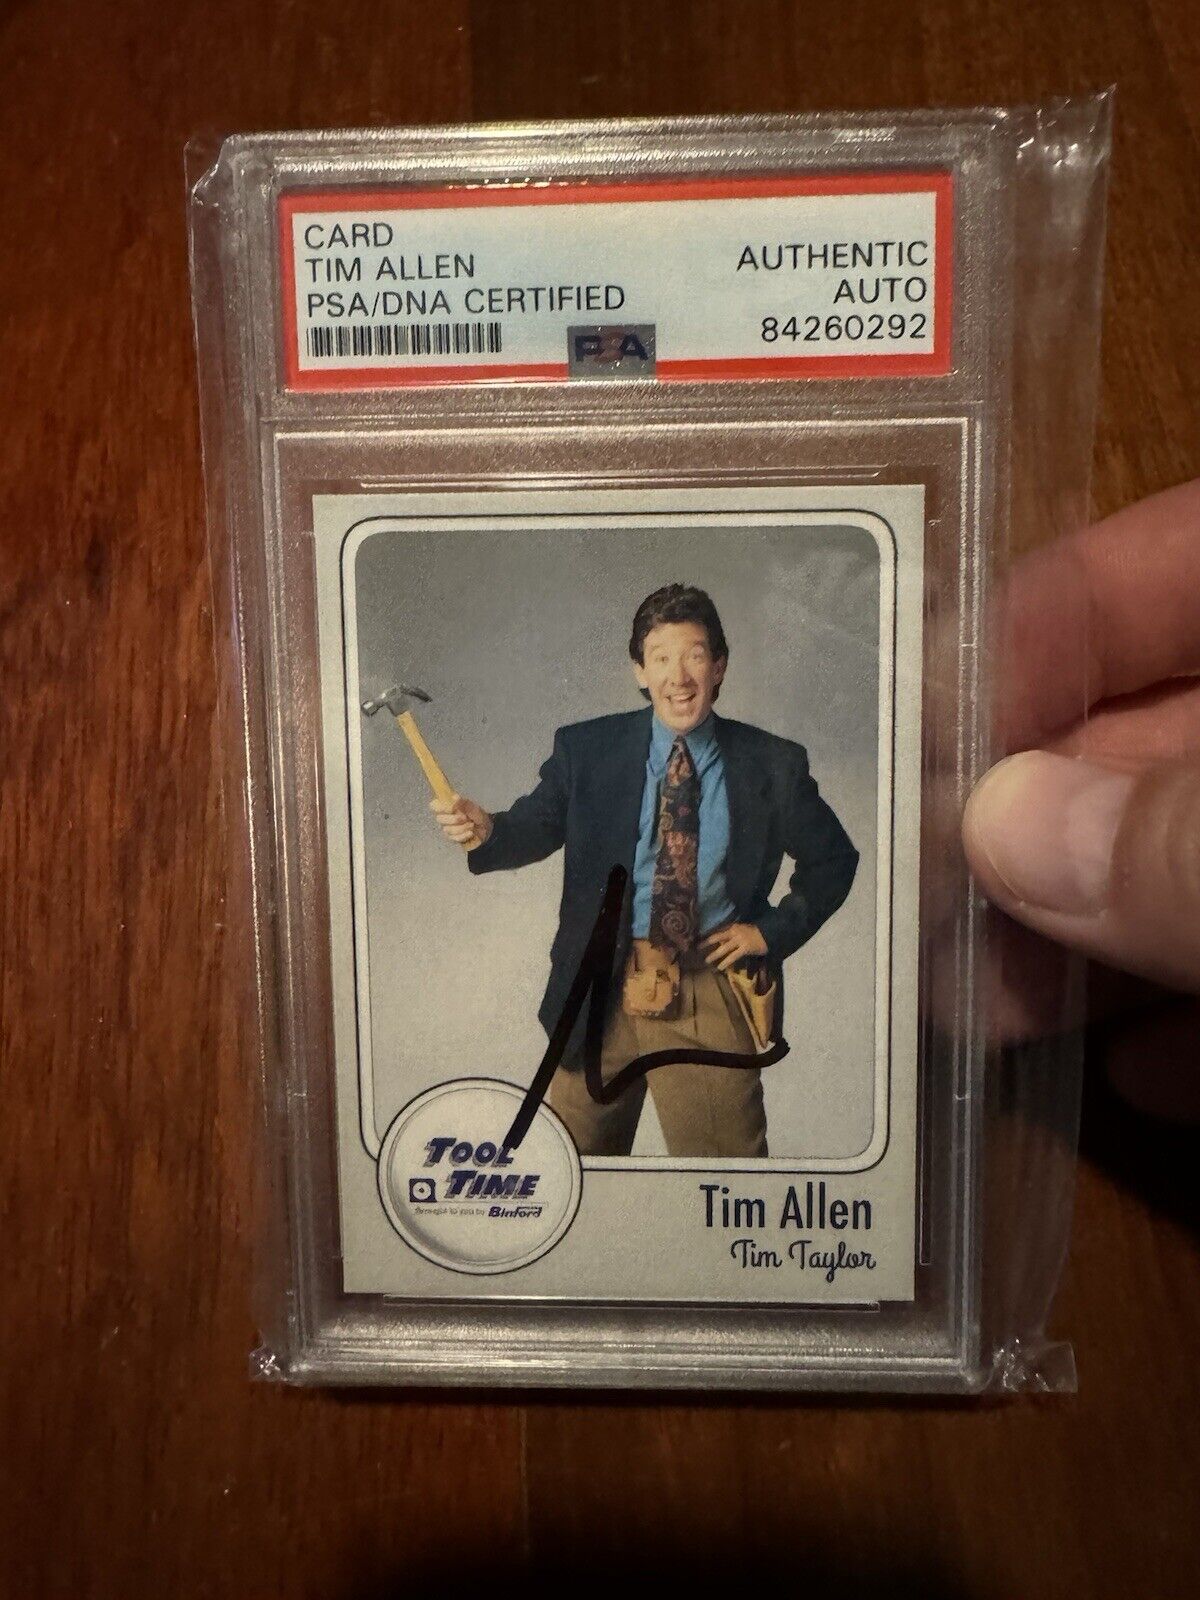 Tim Allen Signed Home Improvement Tool Time Card PSA/DNA Certified. 🛠️ 🧰